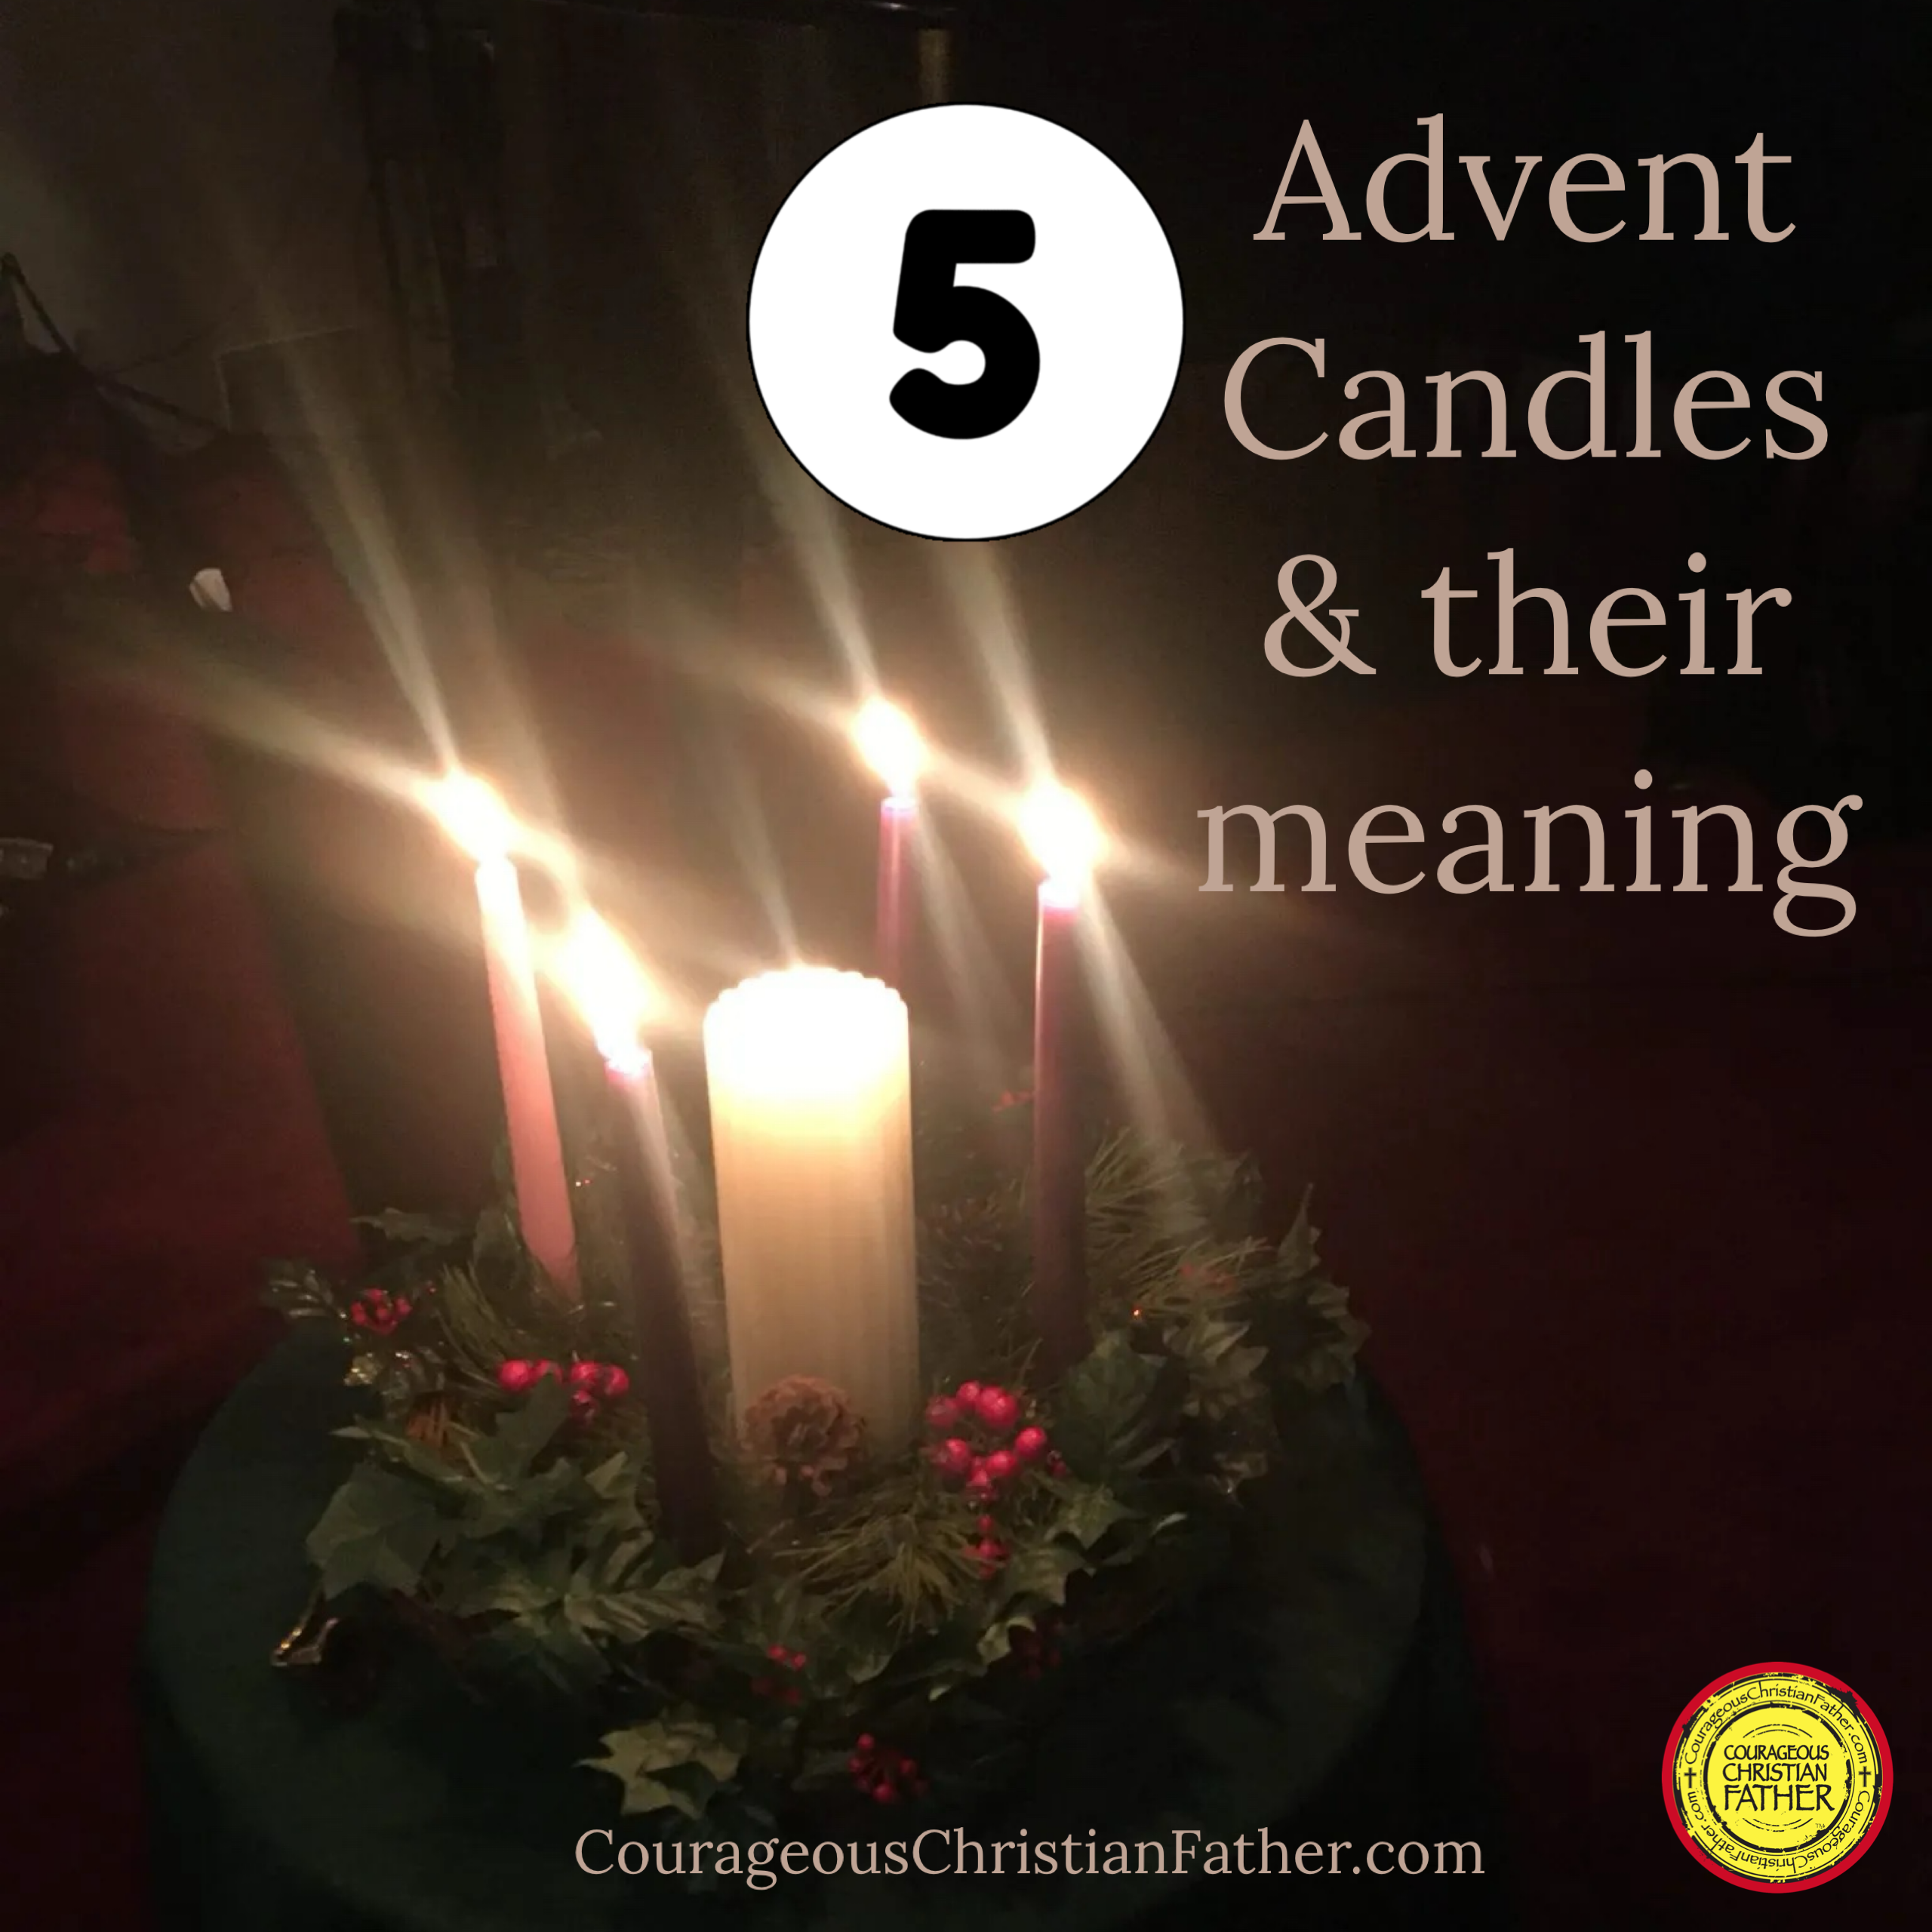 5 Advent Candles & Their Meaning  - I share about what the five different candles that are lit during Advent and what each mean. #AdventCandles #Advent